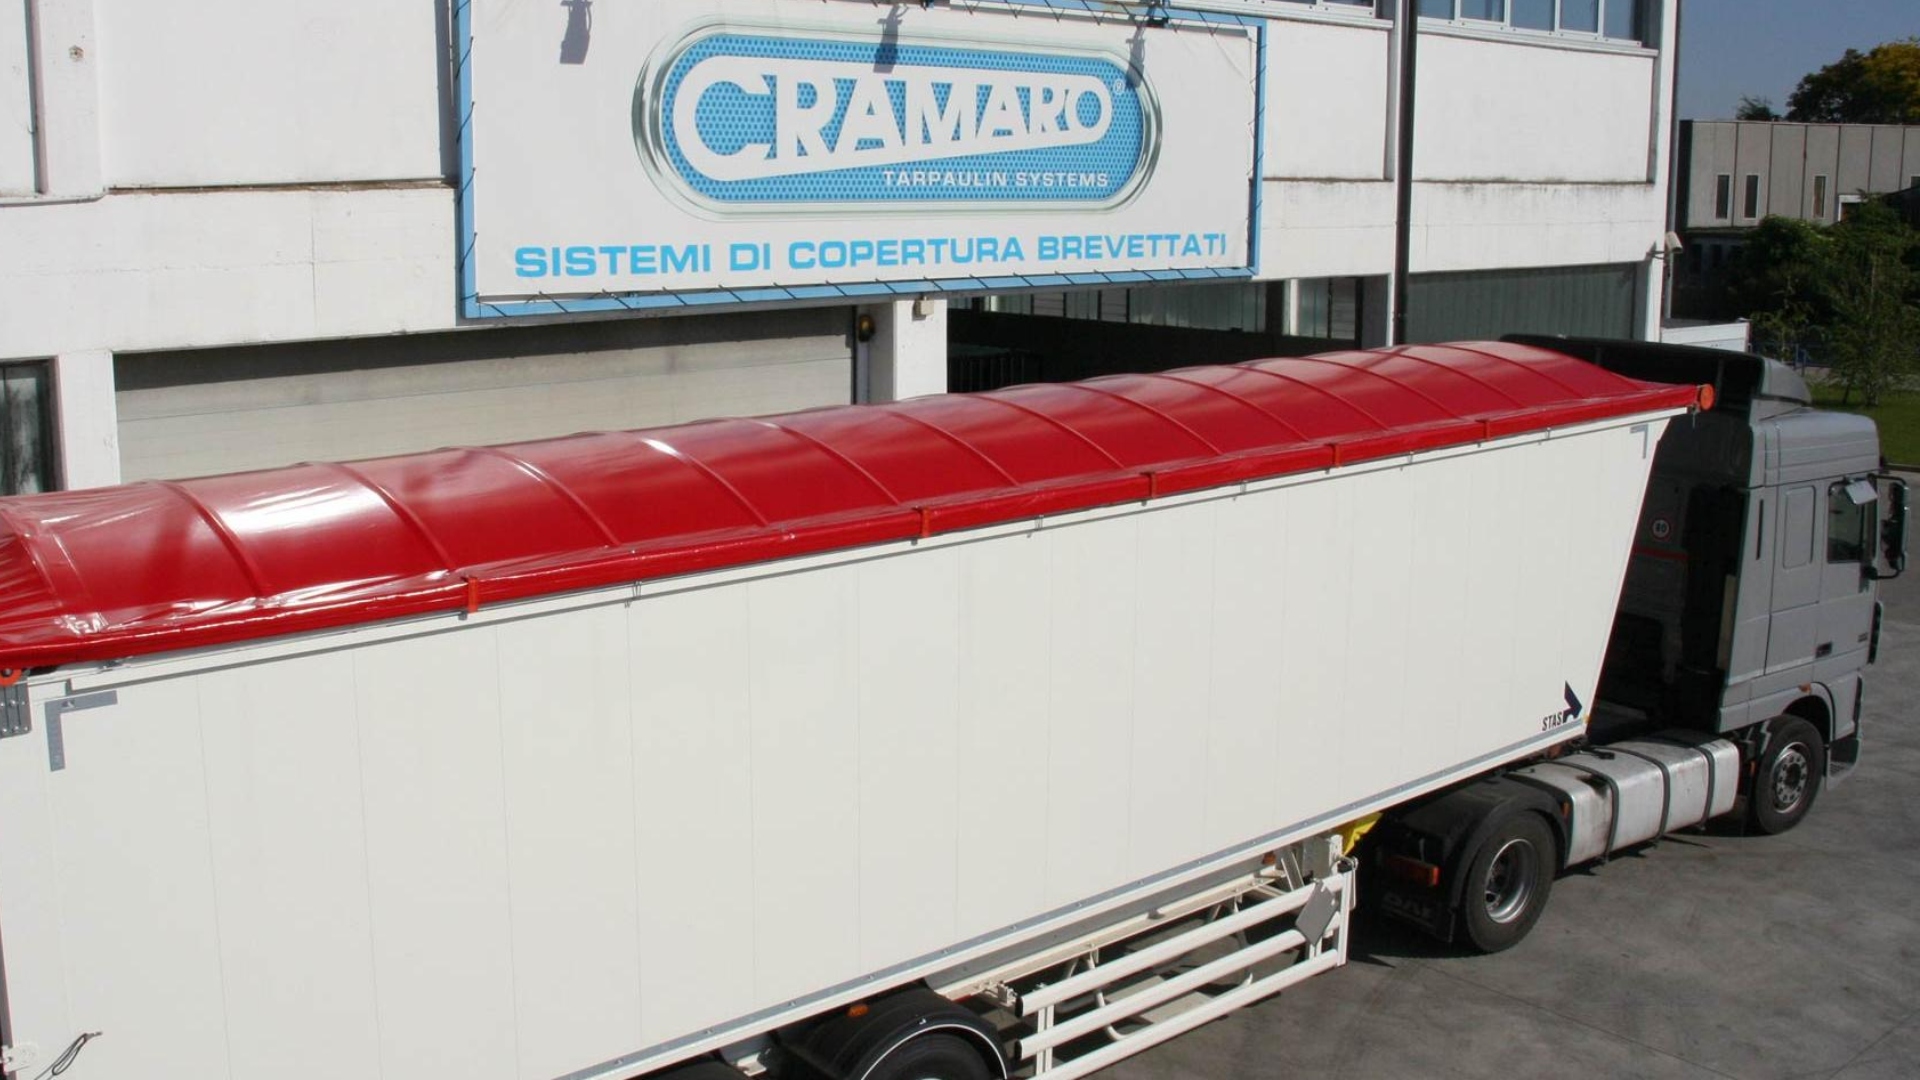 Cramaro Tarpaulin Systems has been acquired by Lifco AB